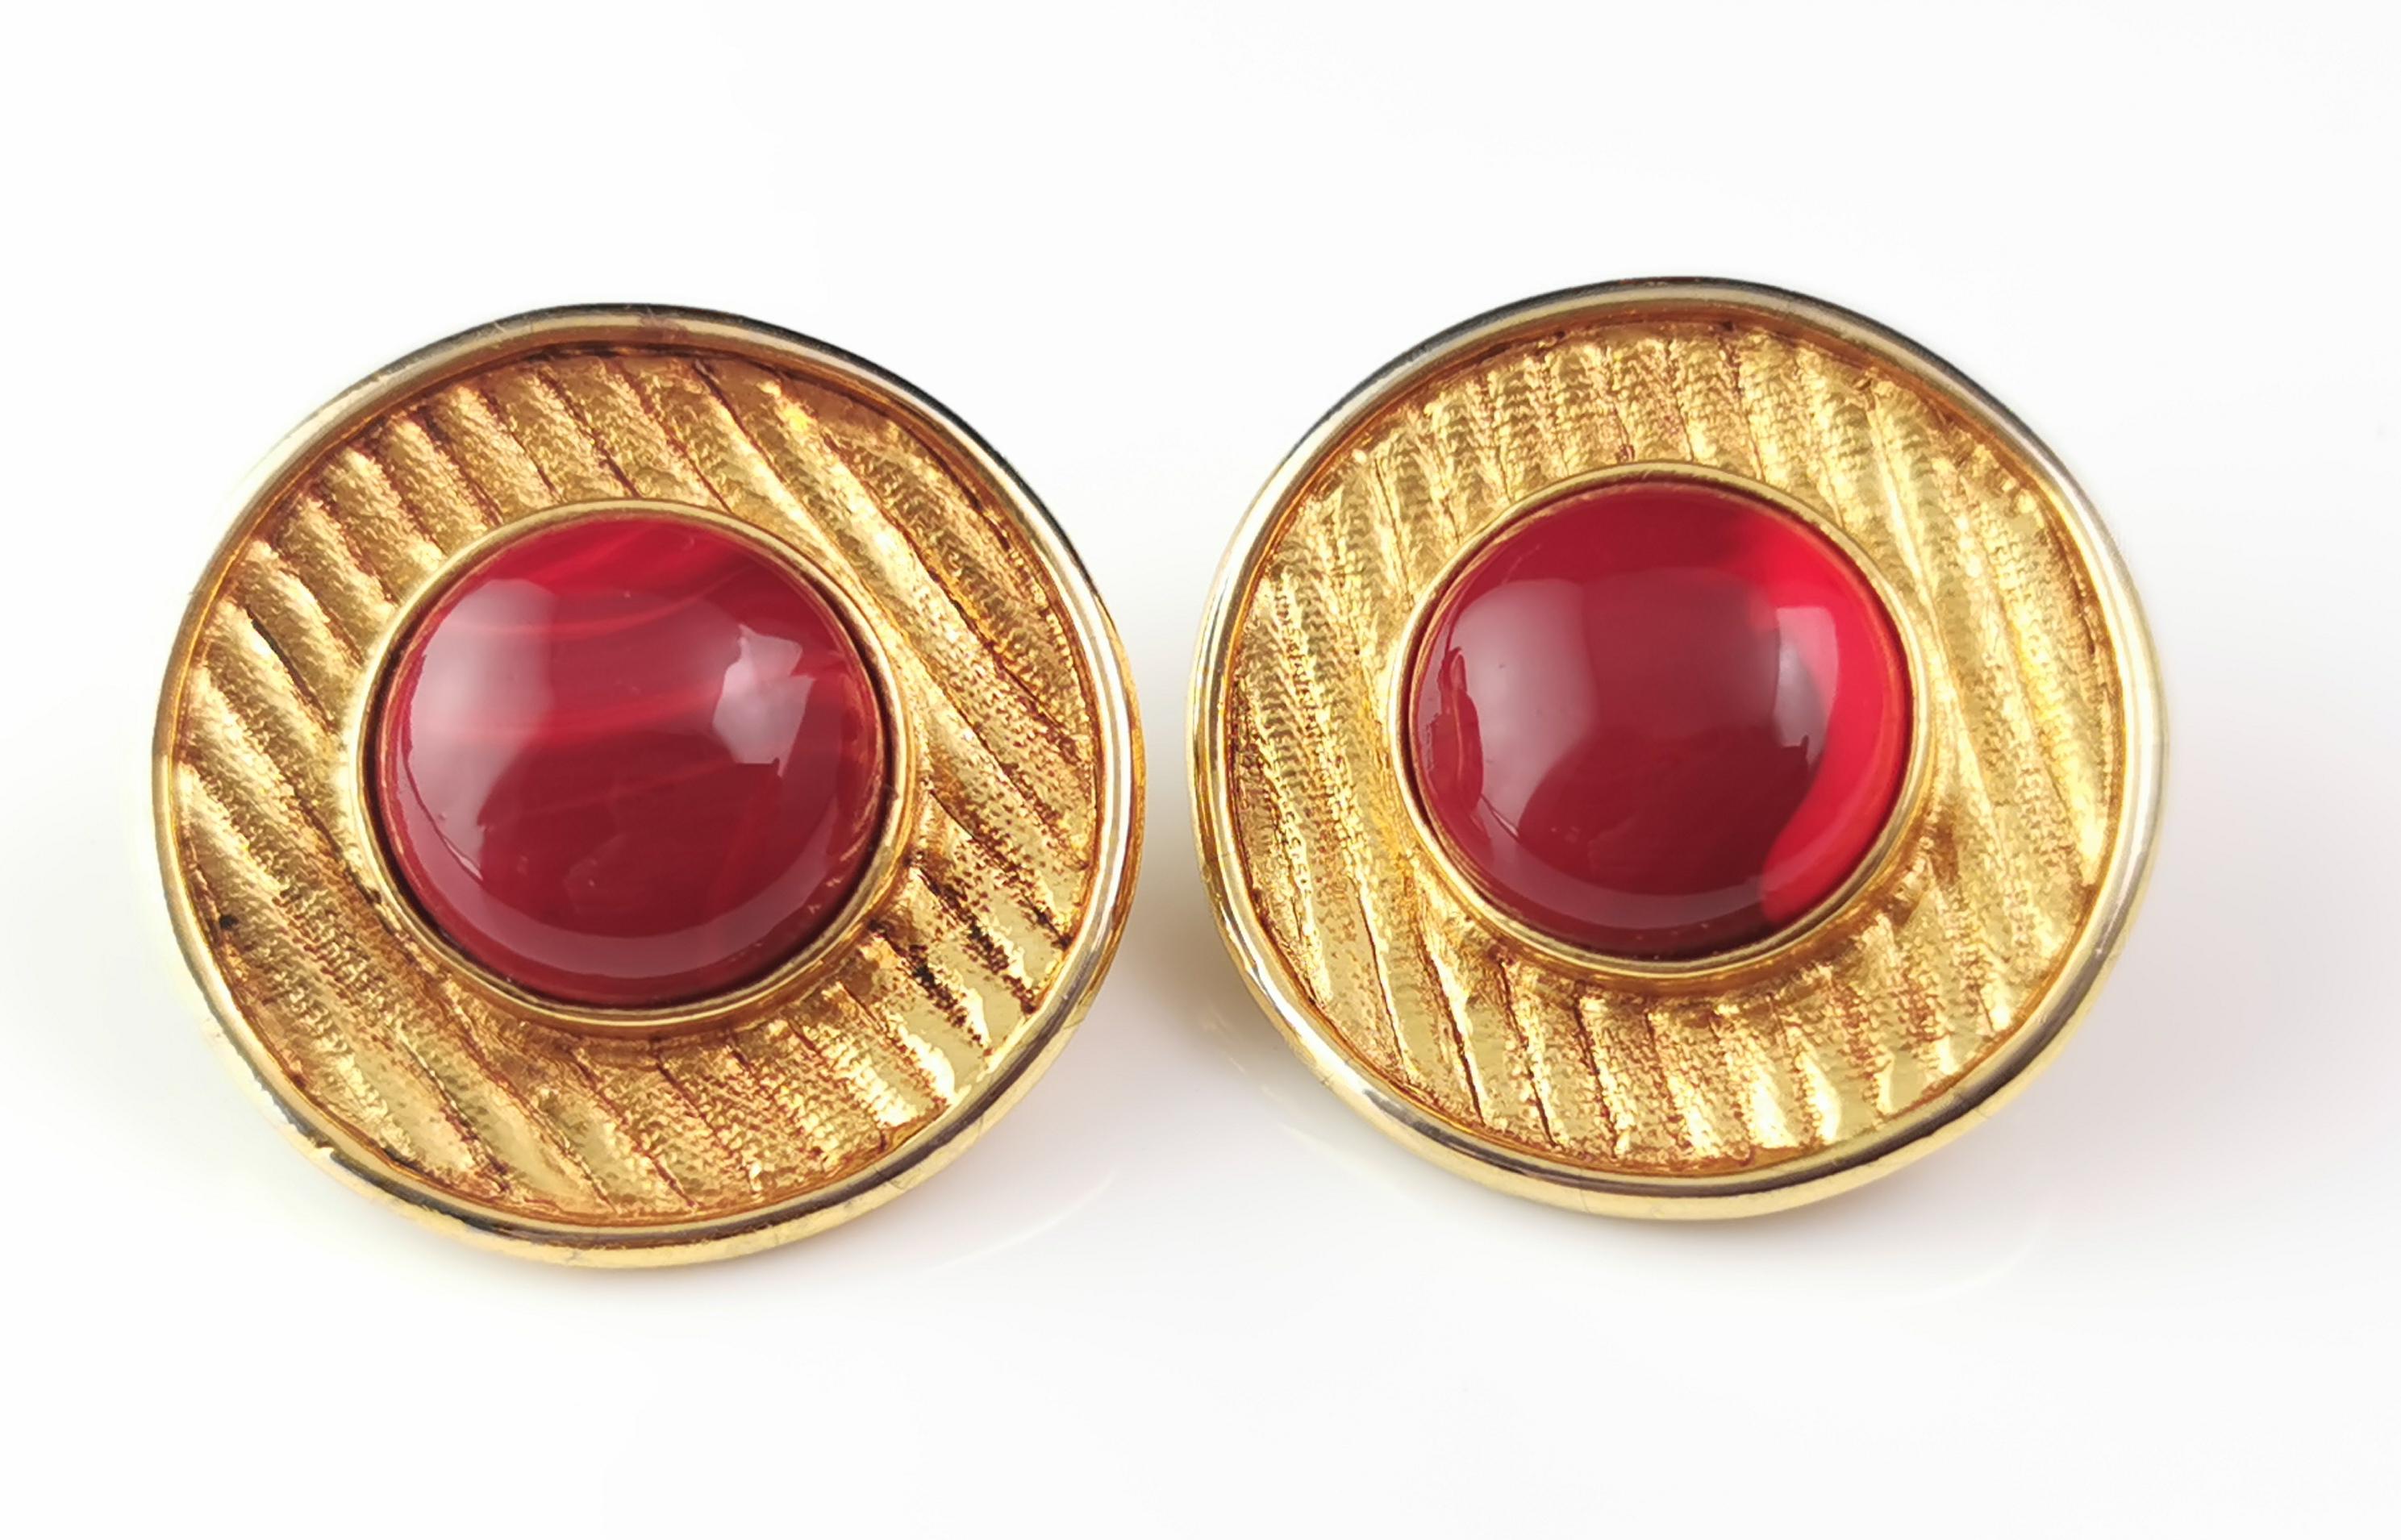 A gorgeous pair of vintage c1980s clip on earrings by Antigona Paris.

Lush rich gold tone circles with a textured line engraved finish featuring a large warm red faux agate cabochon to the centre.

They have a clip fitting to the reverse for